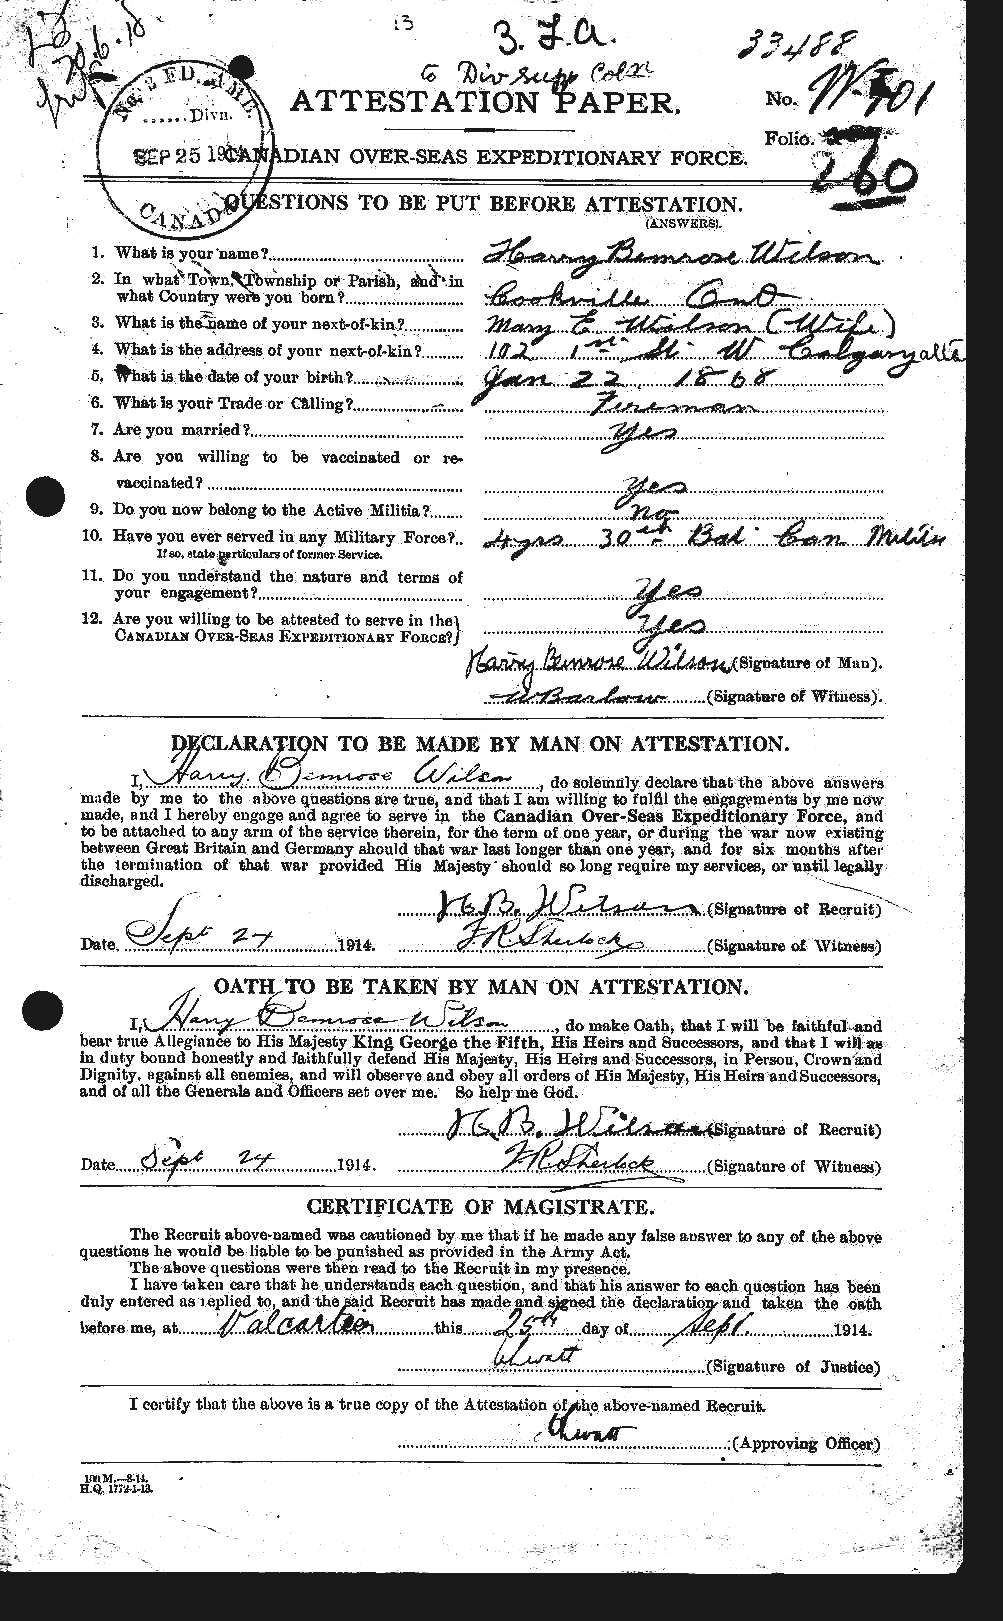 Personnel Records of the First World War - CEF 679457a